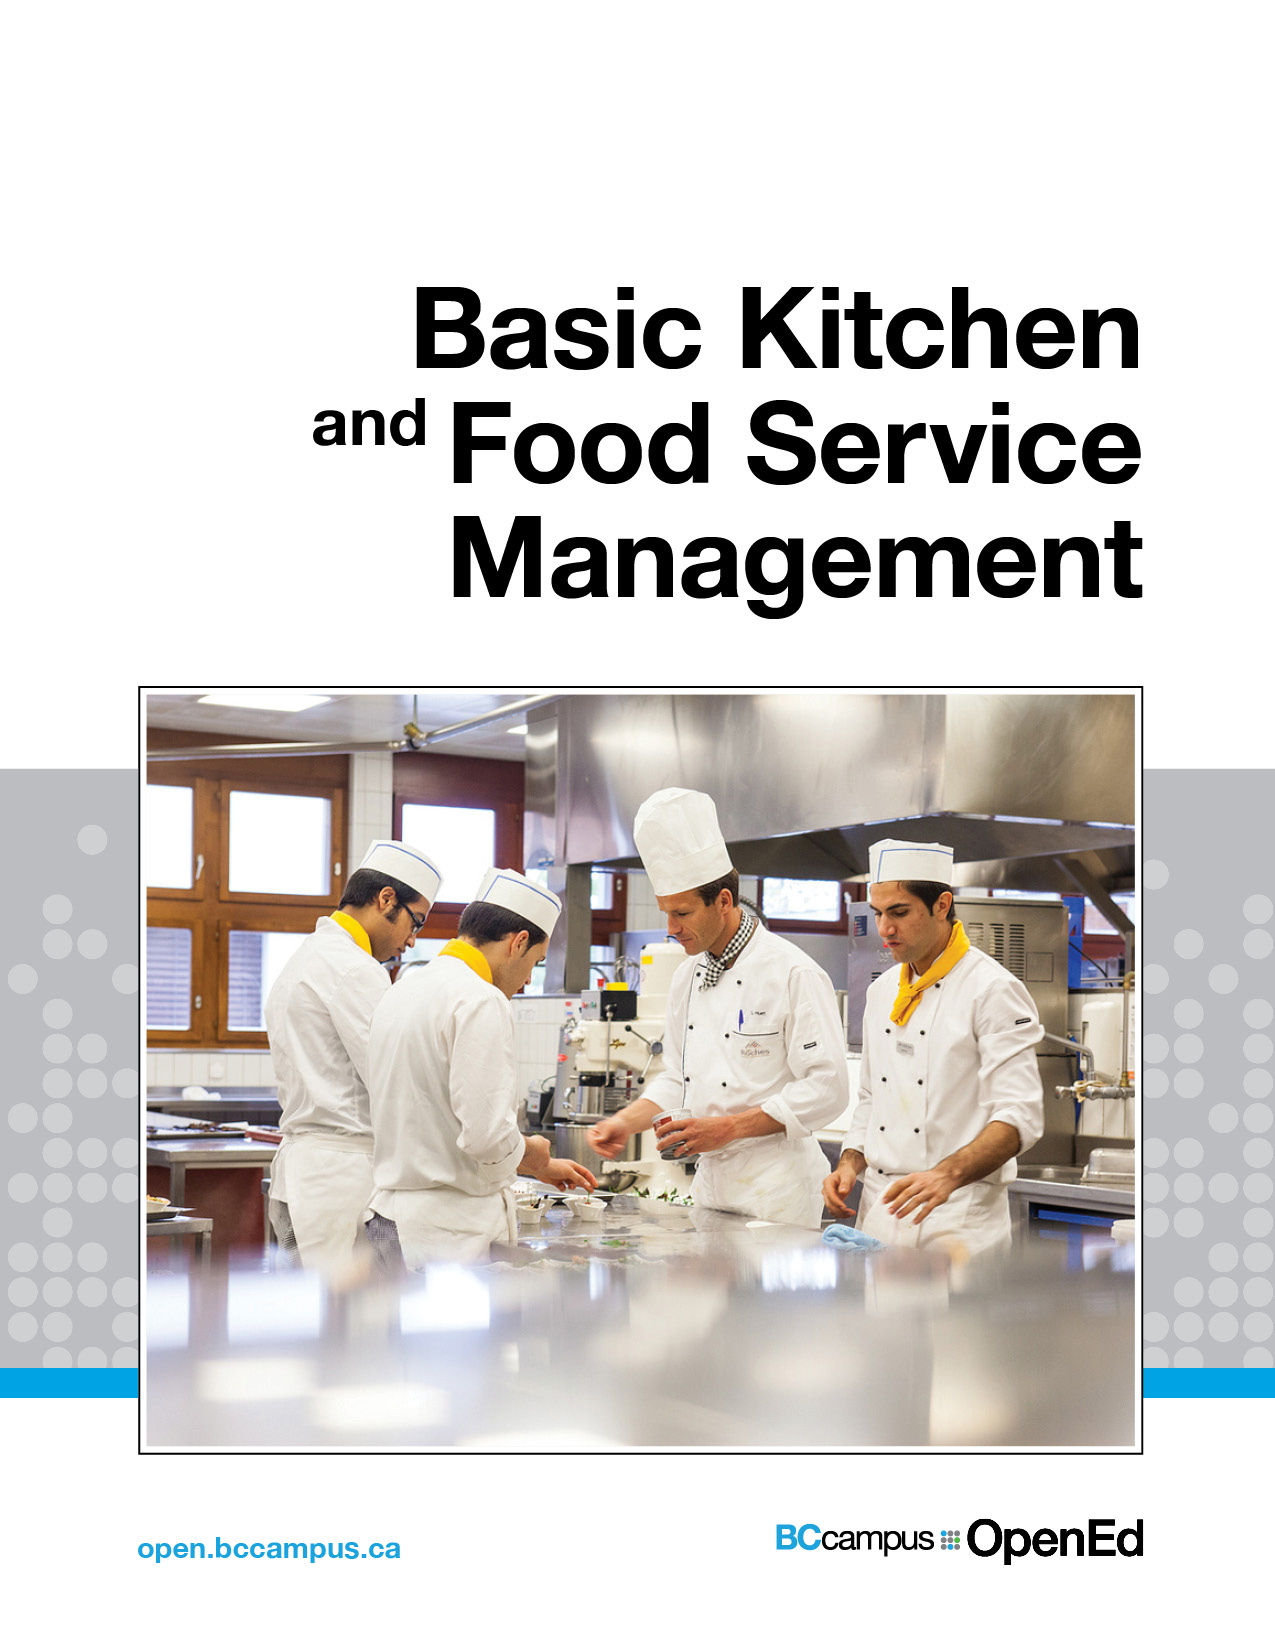 Basic Kitchen and Food Service Management - Open Textbook